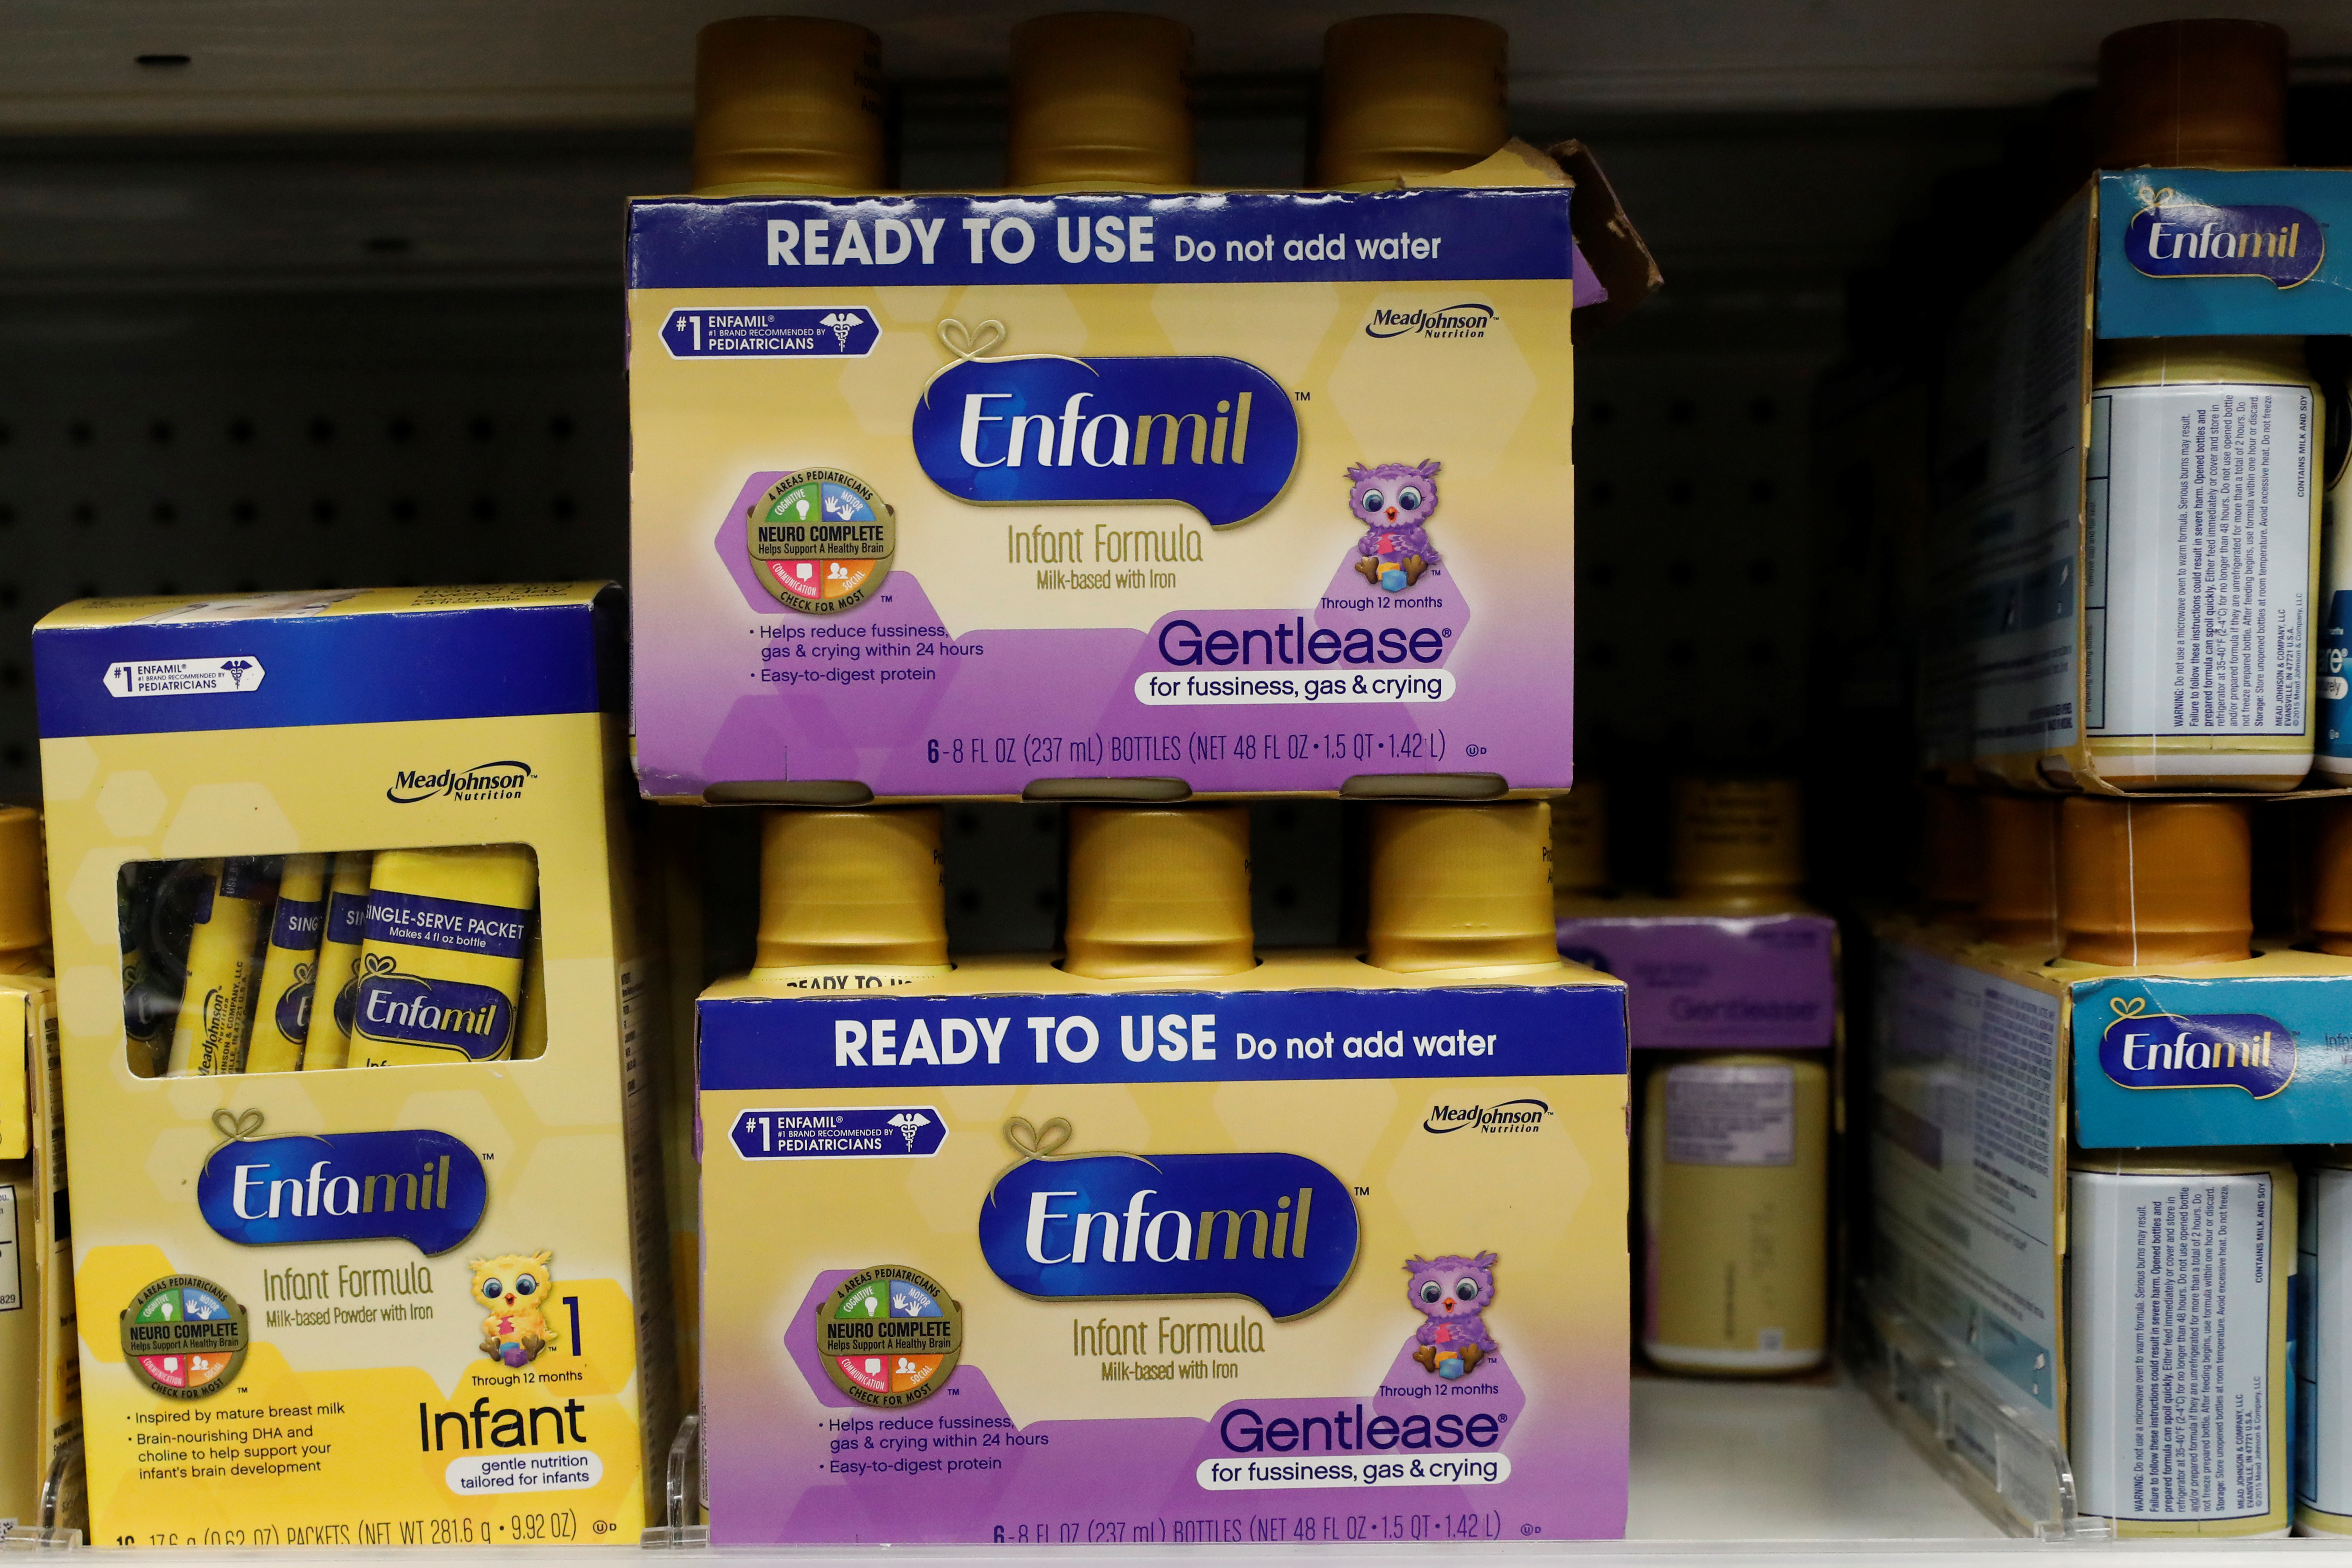 Mead Johnson's product Enfamil infant formula is displayed on a store shelf in New York